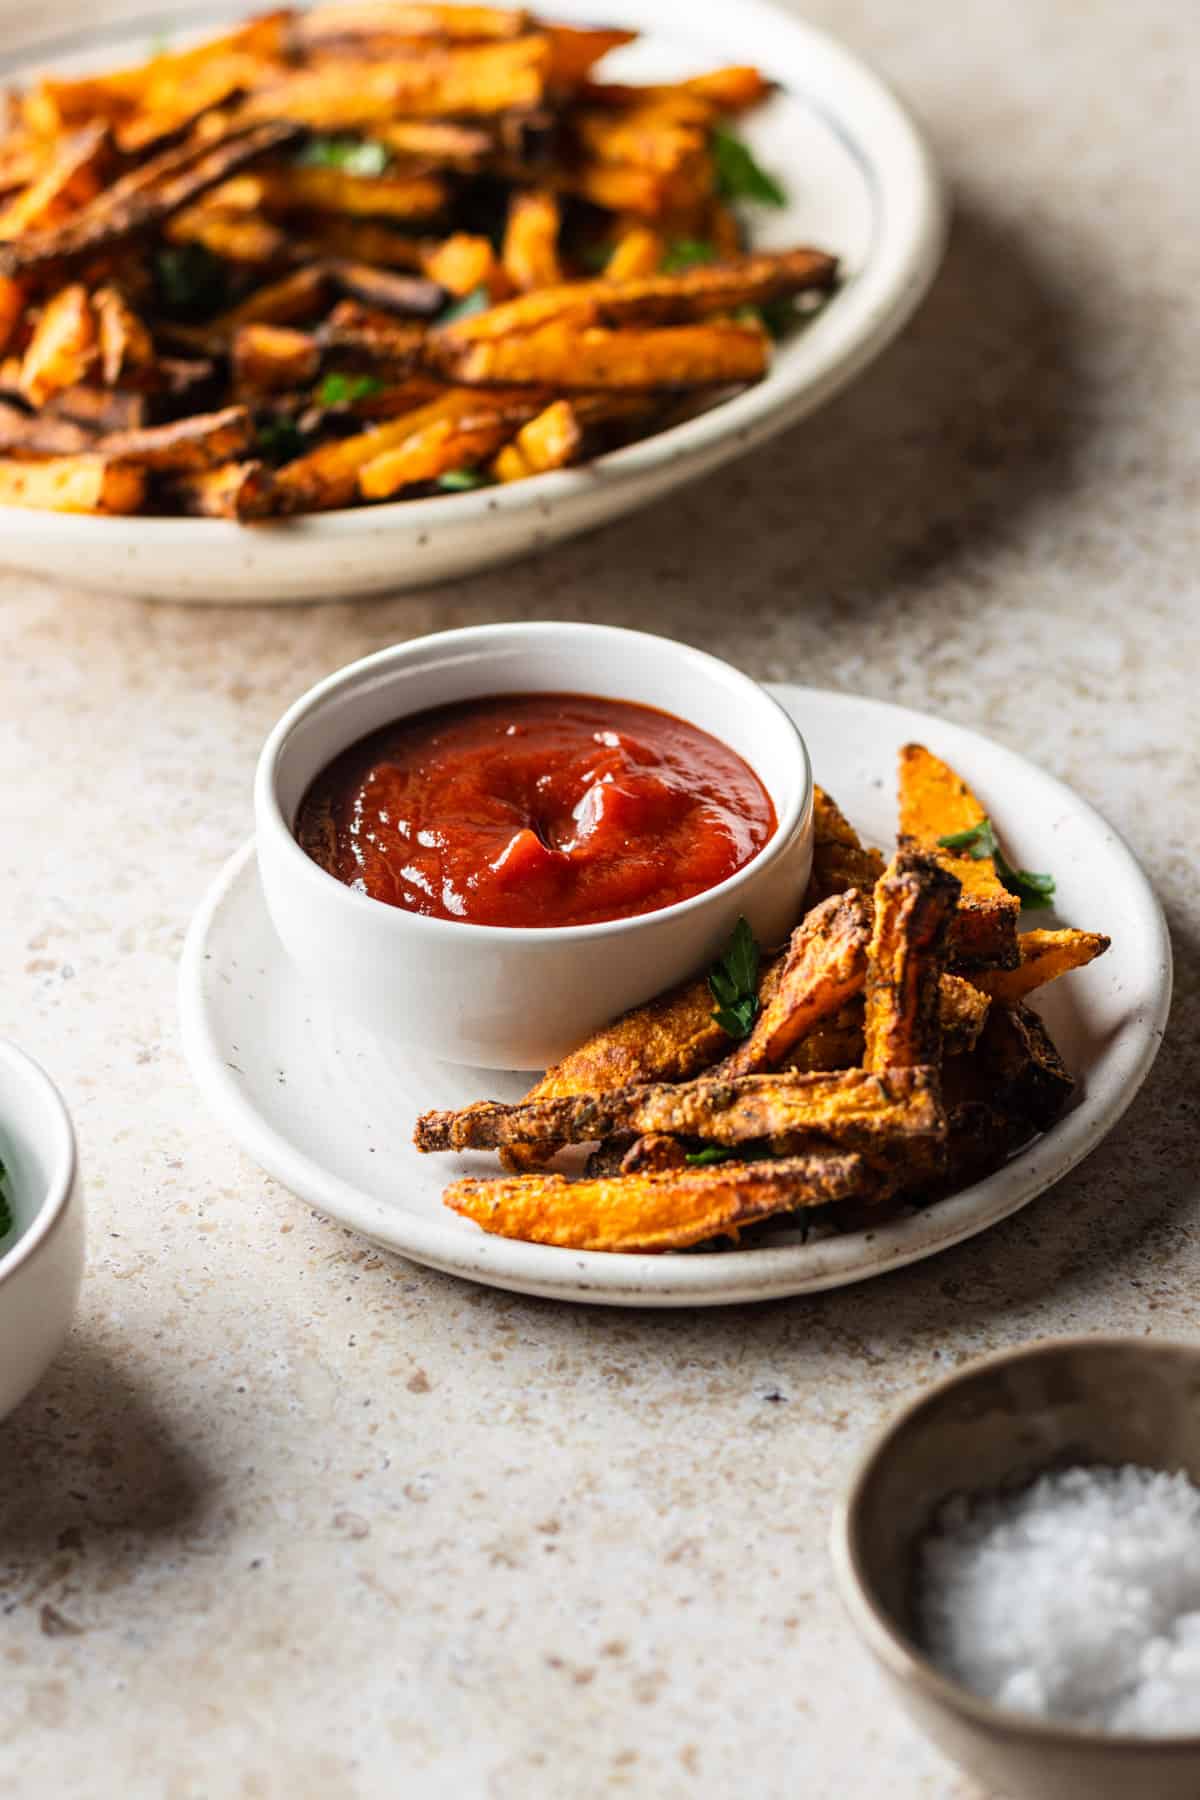 A small plate with air fried butternut squash fries and a side of ketchup.